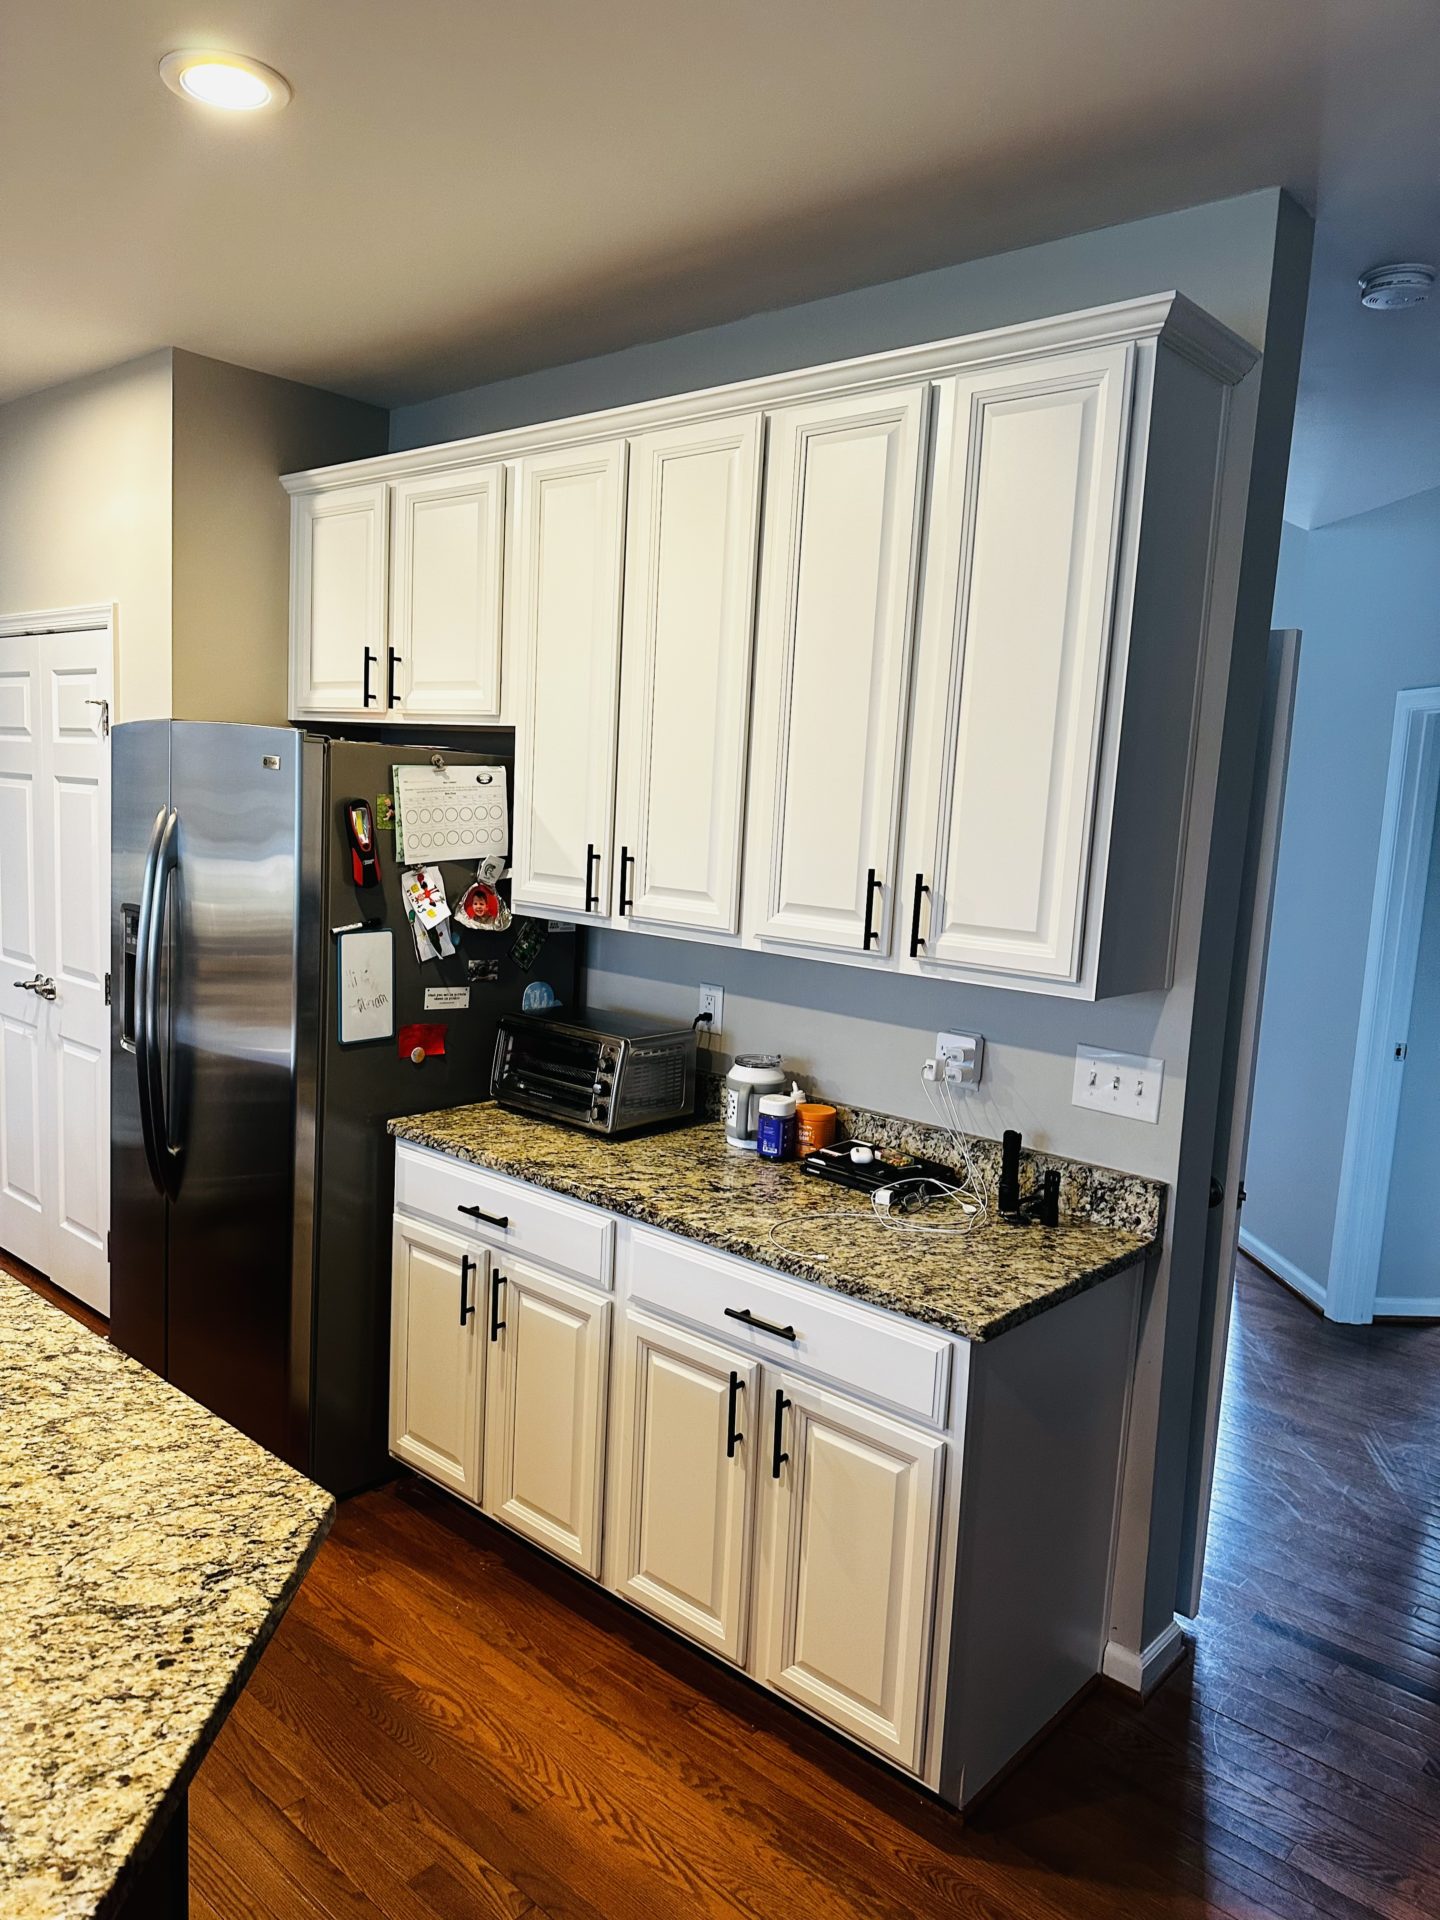 Transformed kitchen cabinets with a fresh coat of paint.